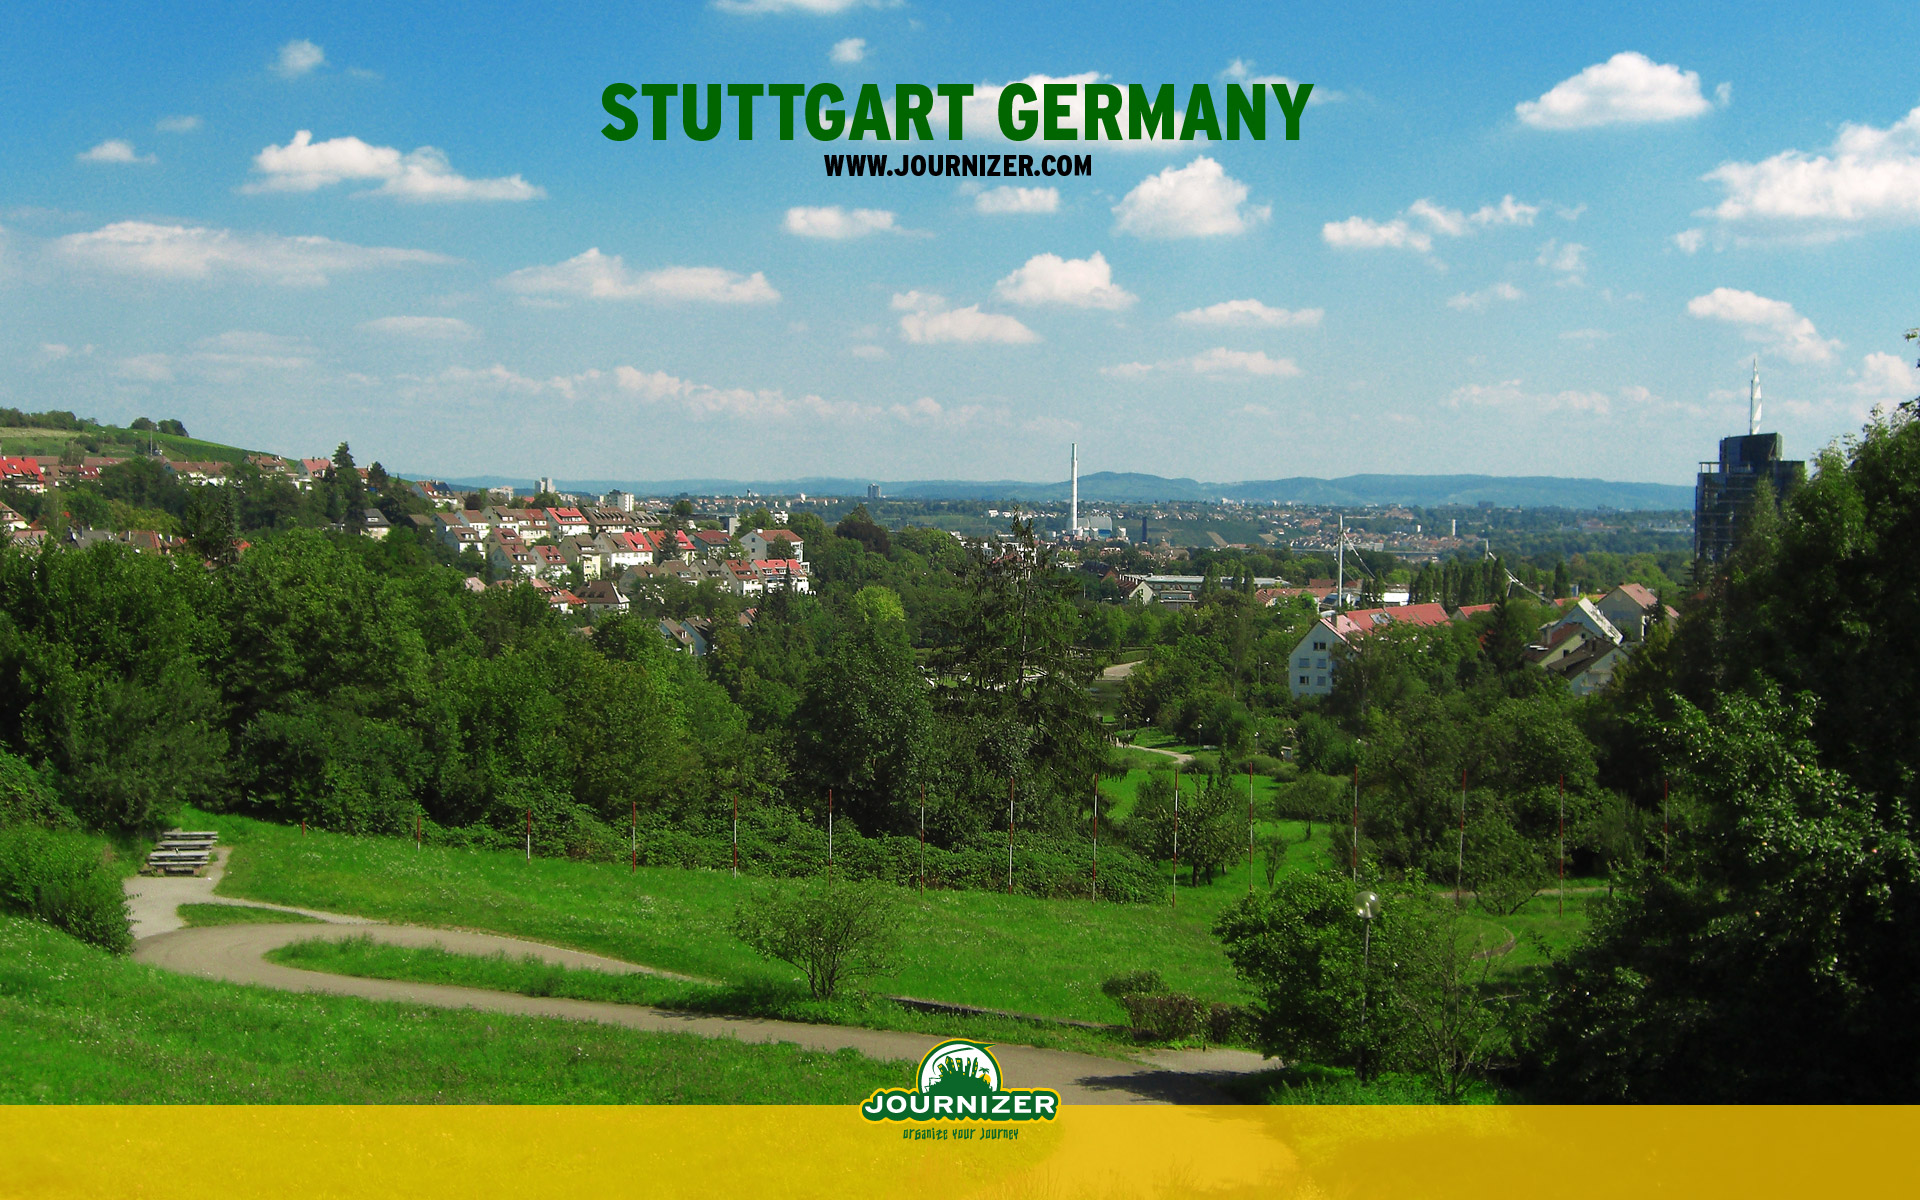 Stuttgart Germany Wallpaper And Image Pictures Photos